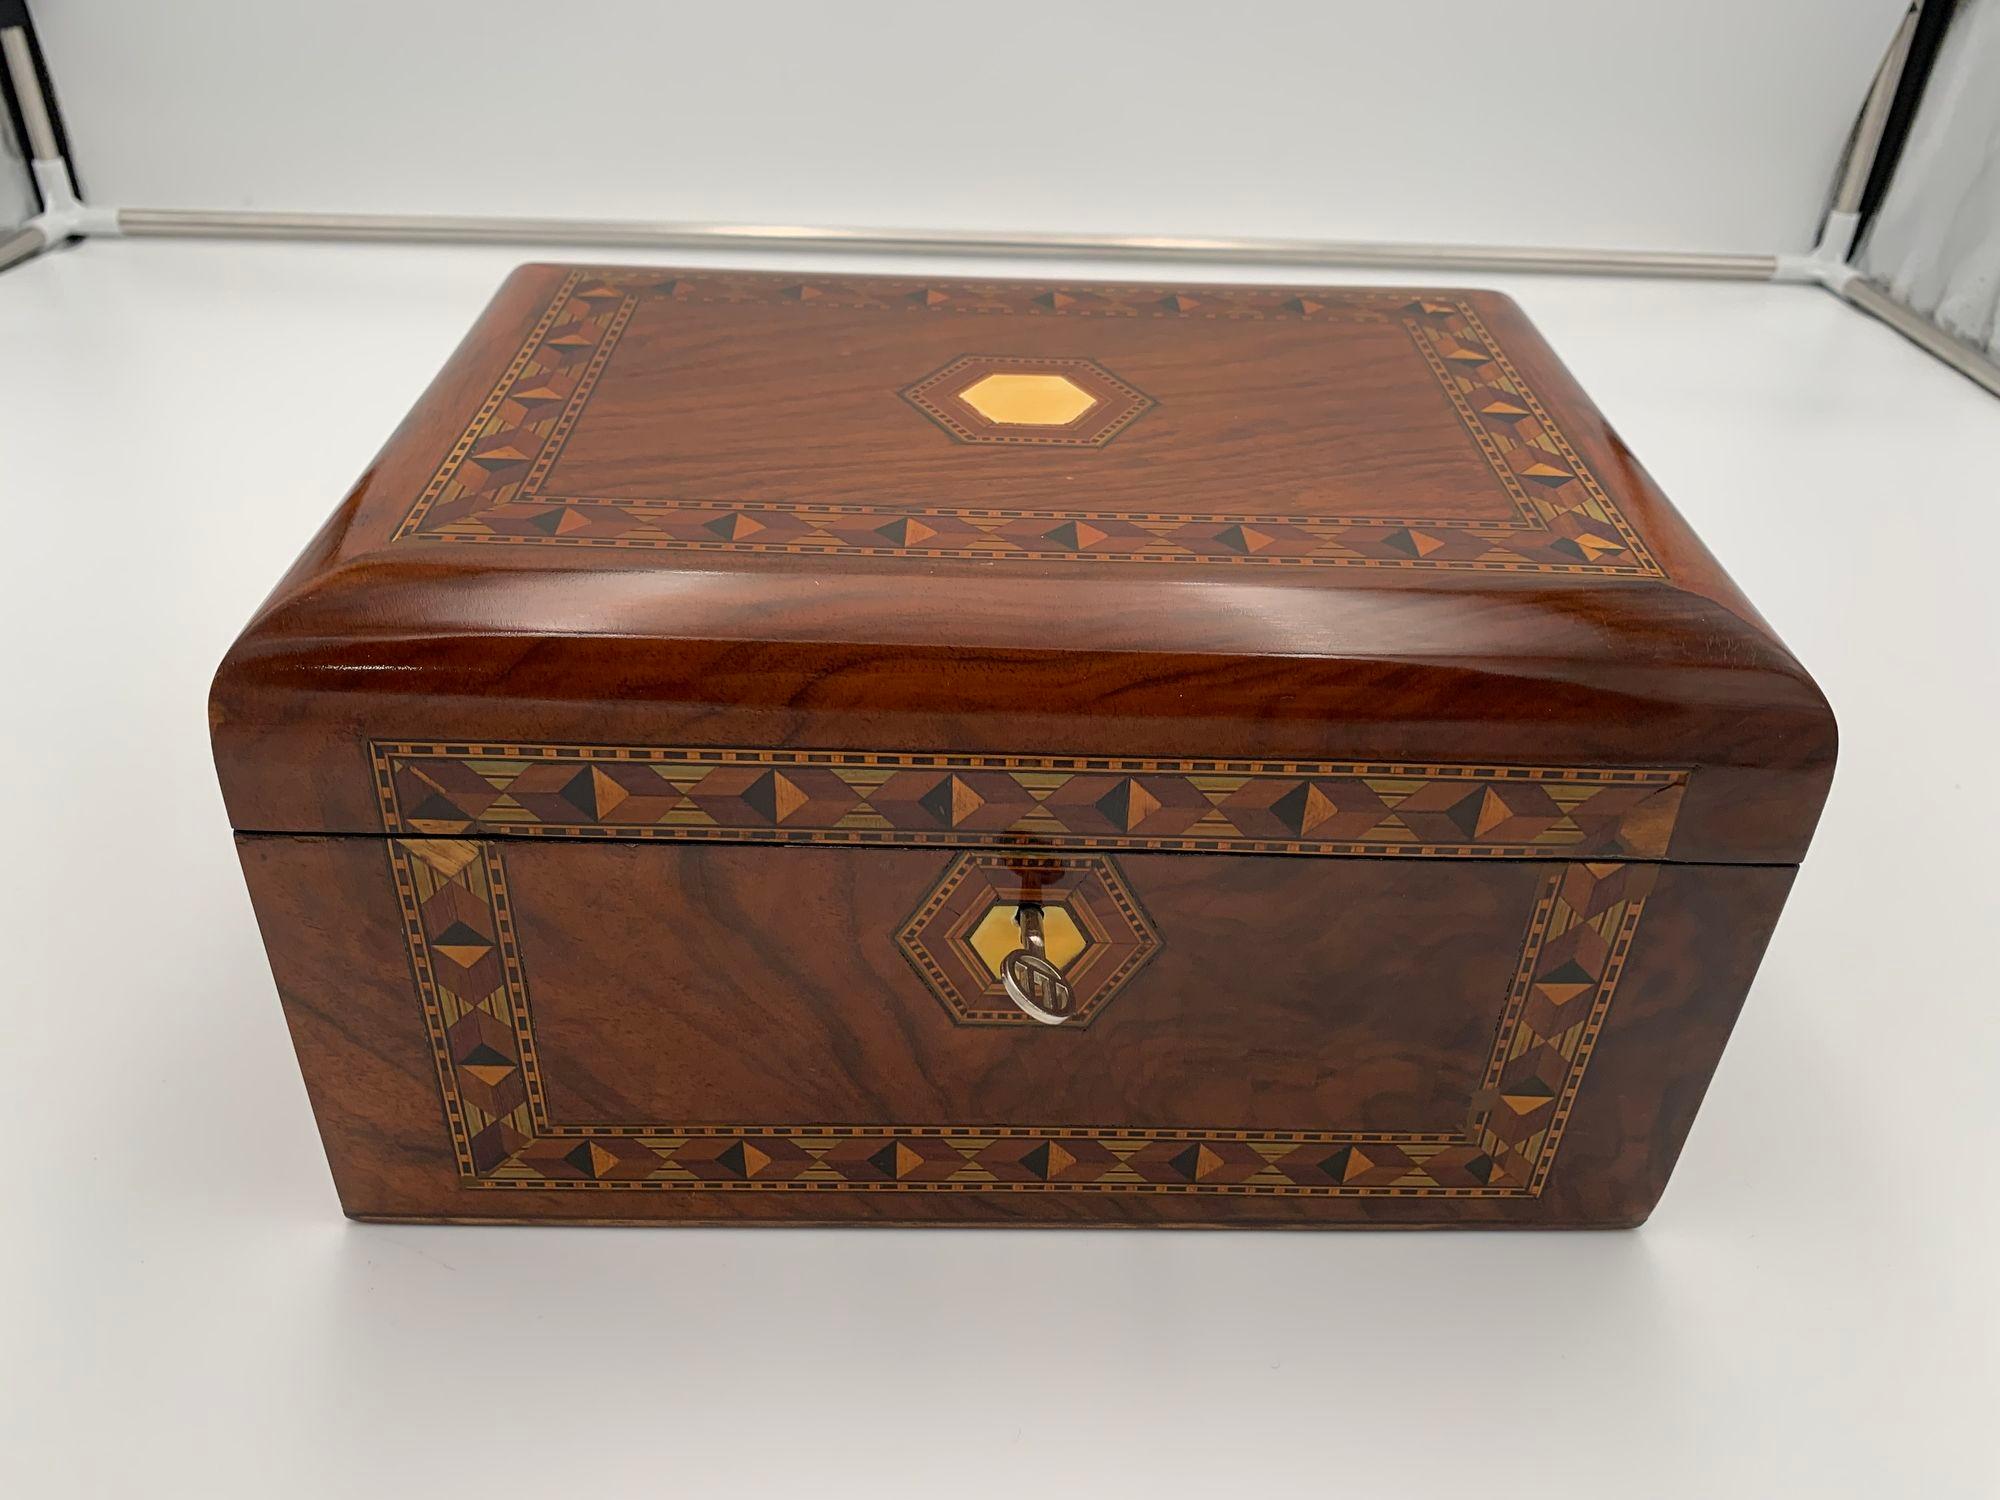 Neoclassical Revival Historicism Jewelry Box, Walnut with Inlays, Germany, 19th Century For Sale